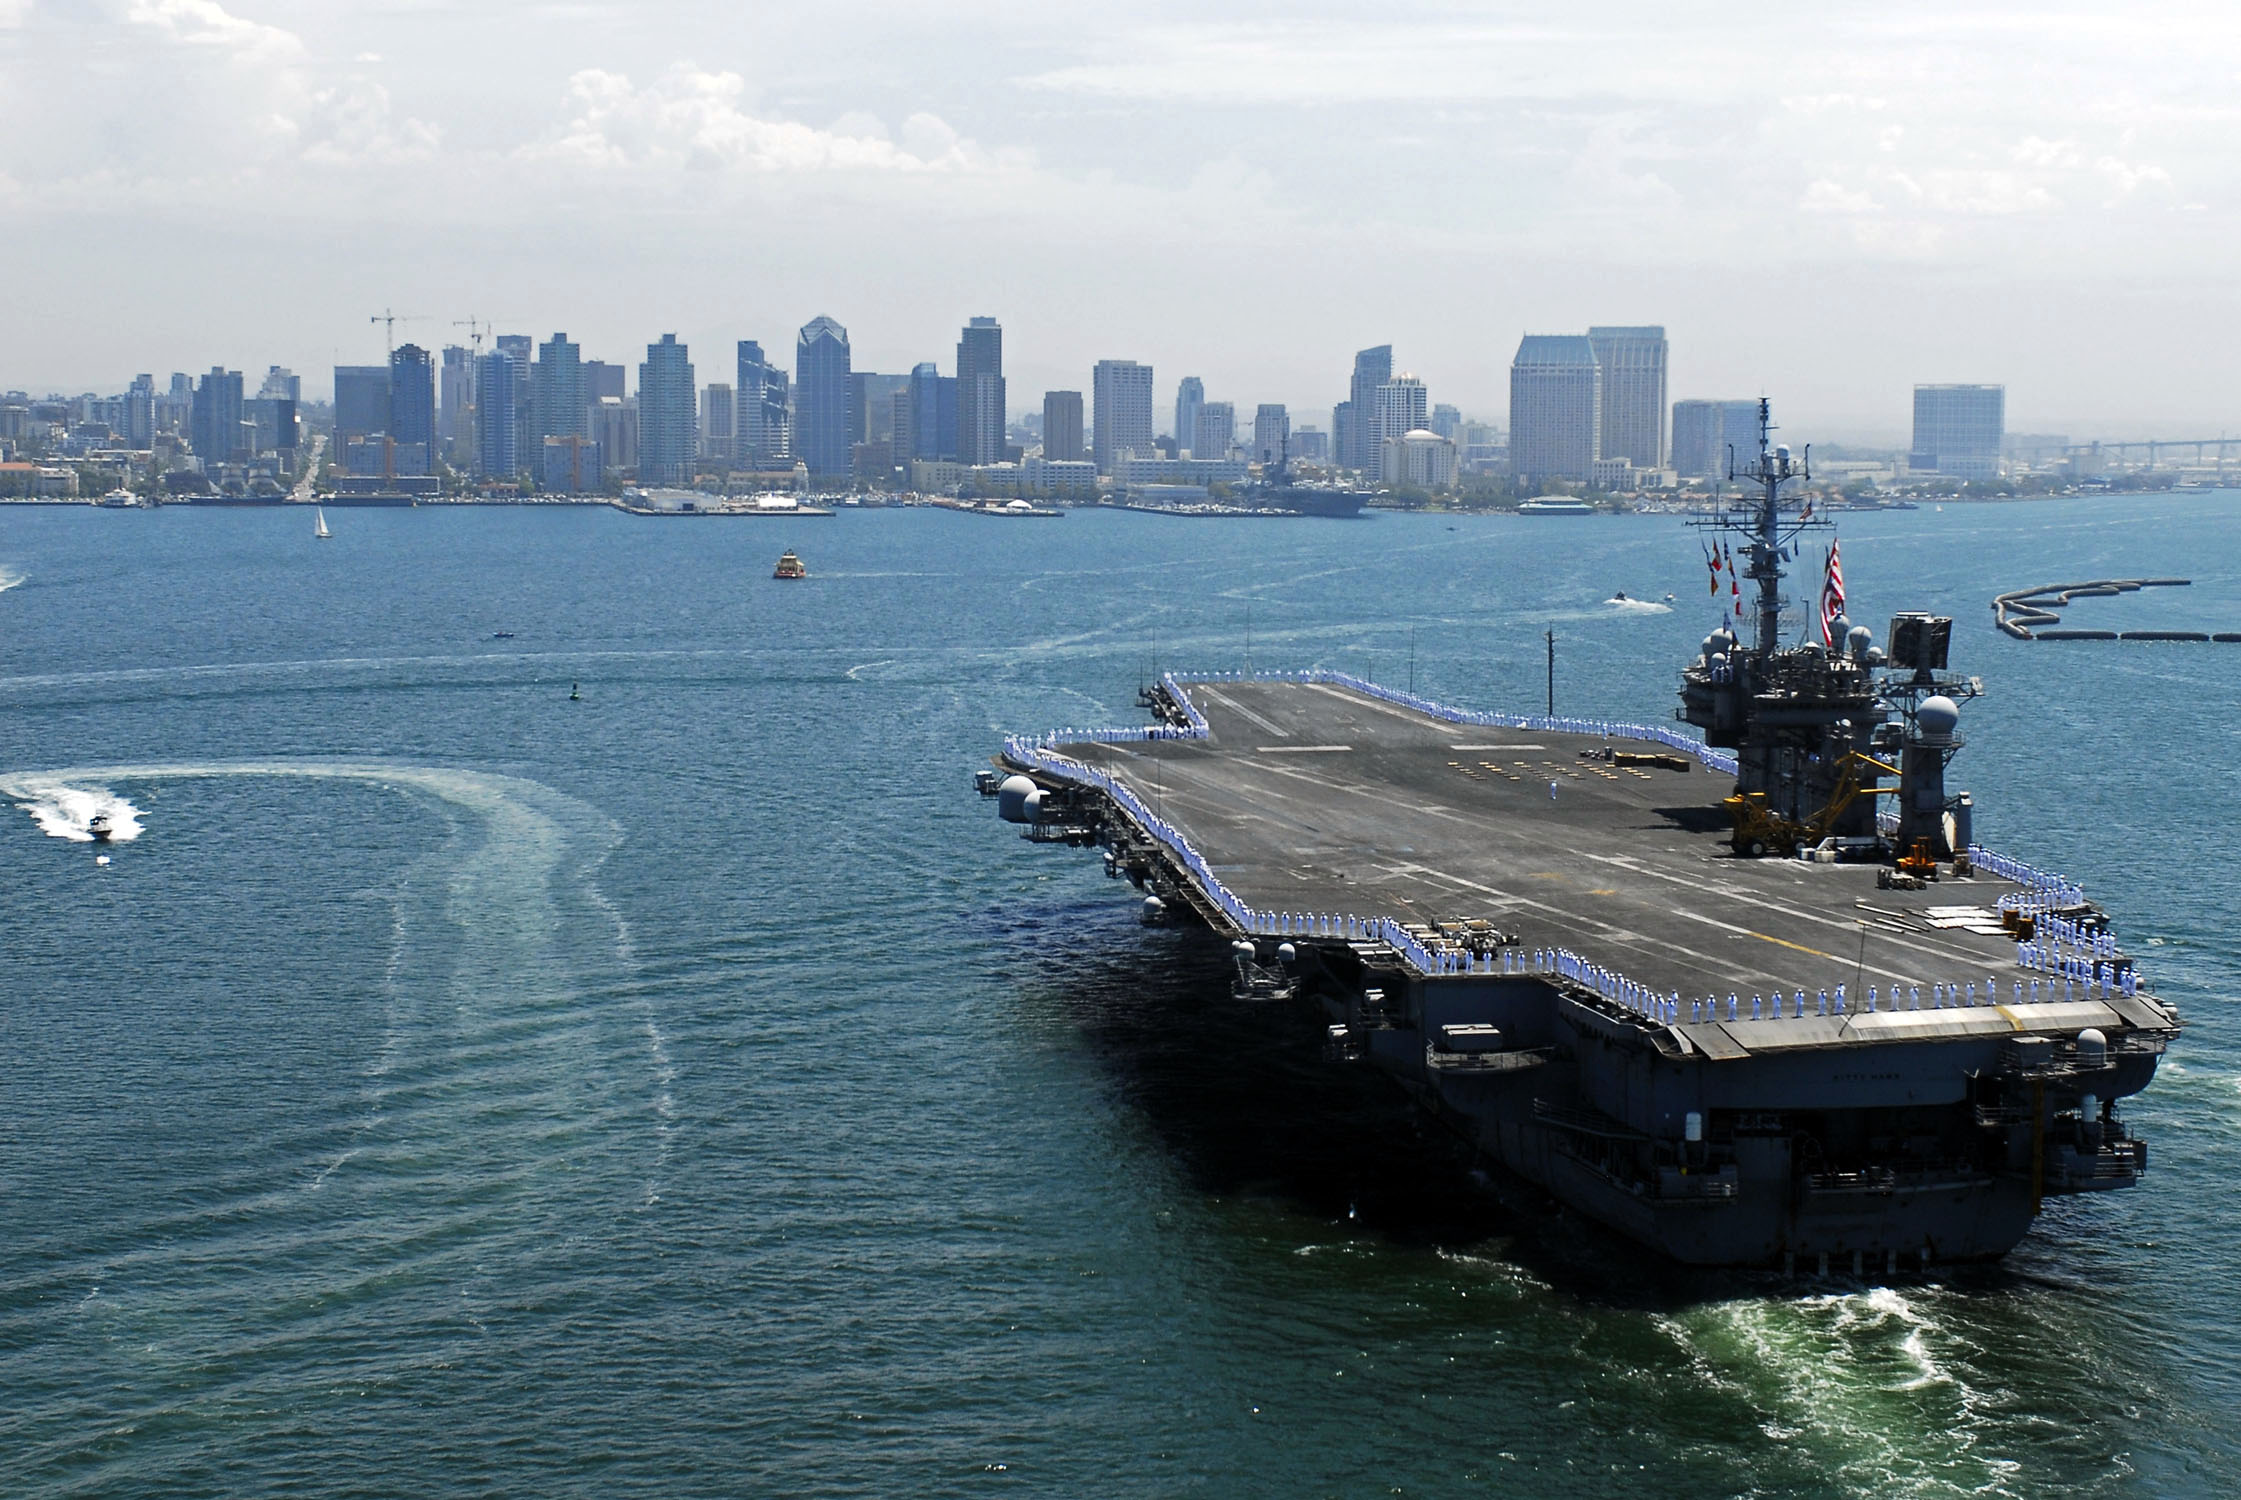 US_Navy_080807-N-7883G-228_The_aircraft_carrier_USS_Kitty_Hawk_%28CV_63%29_prepares_to_moor_at_Naval_Air_Station_North_Island_upon_her_return_to_San_Diego_Thursday%2C_Aug._7%2C_2008.jpg